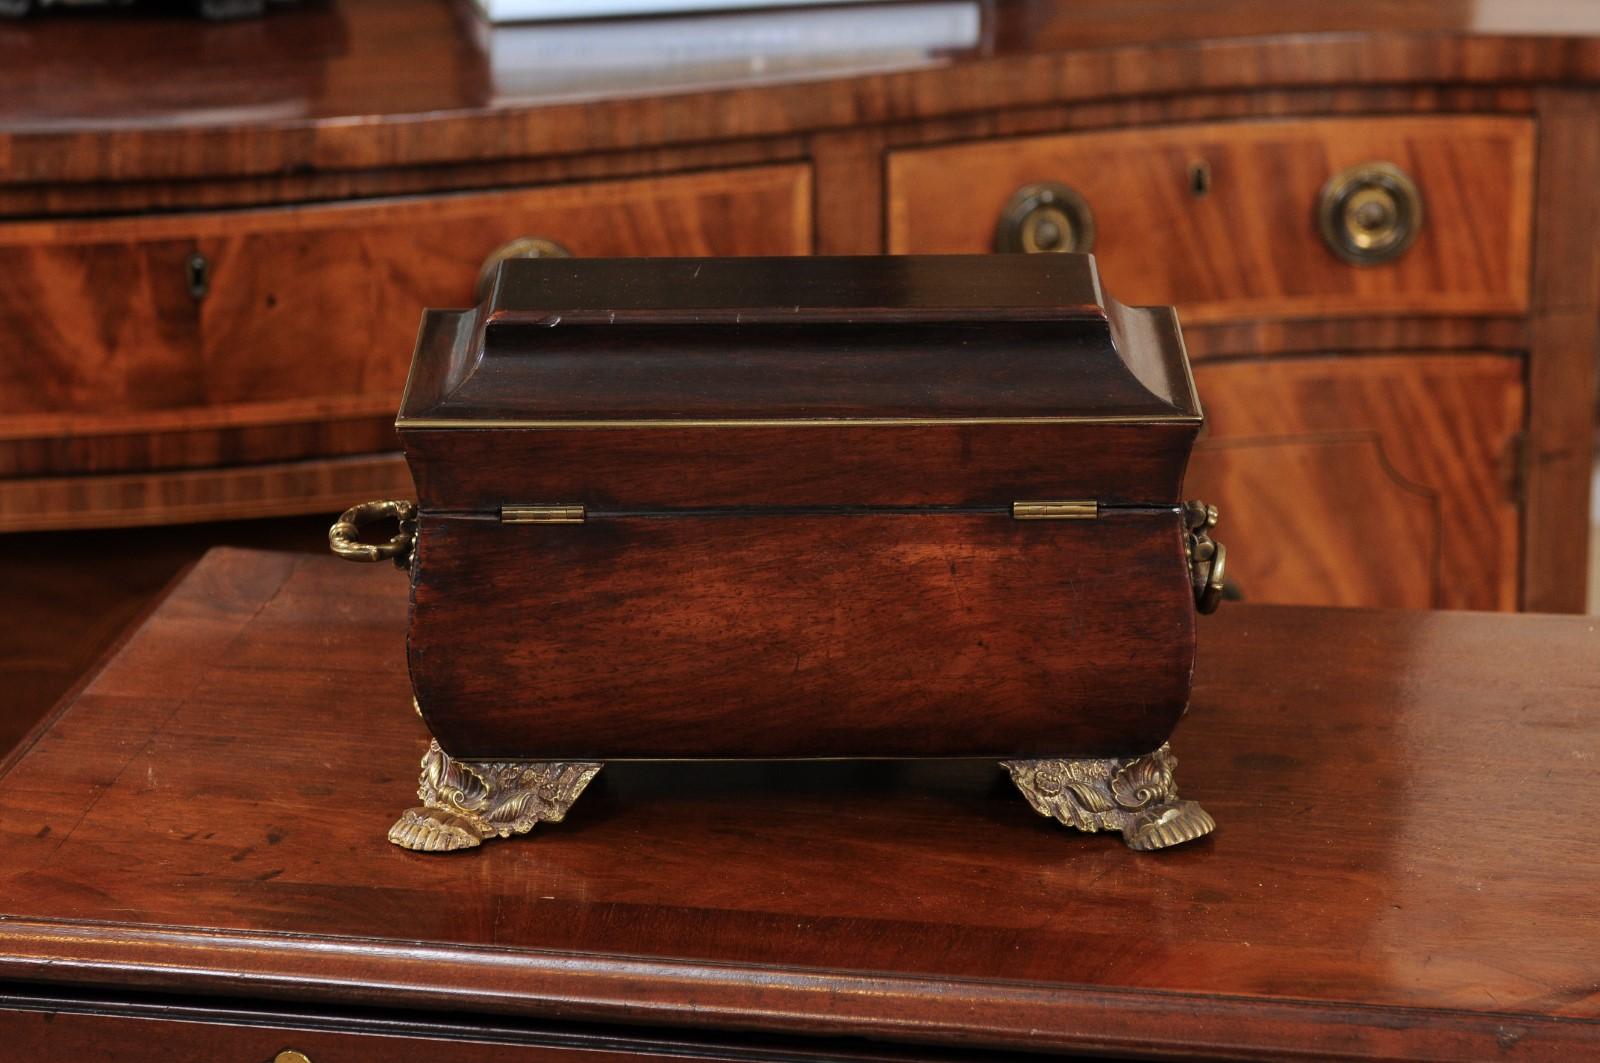 Regency Pagoda Form Work Box with Brass Feet & Inlay, Early 19th Century England For Sale 6